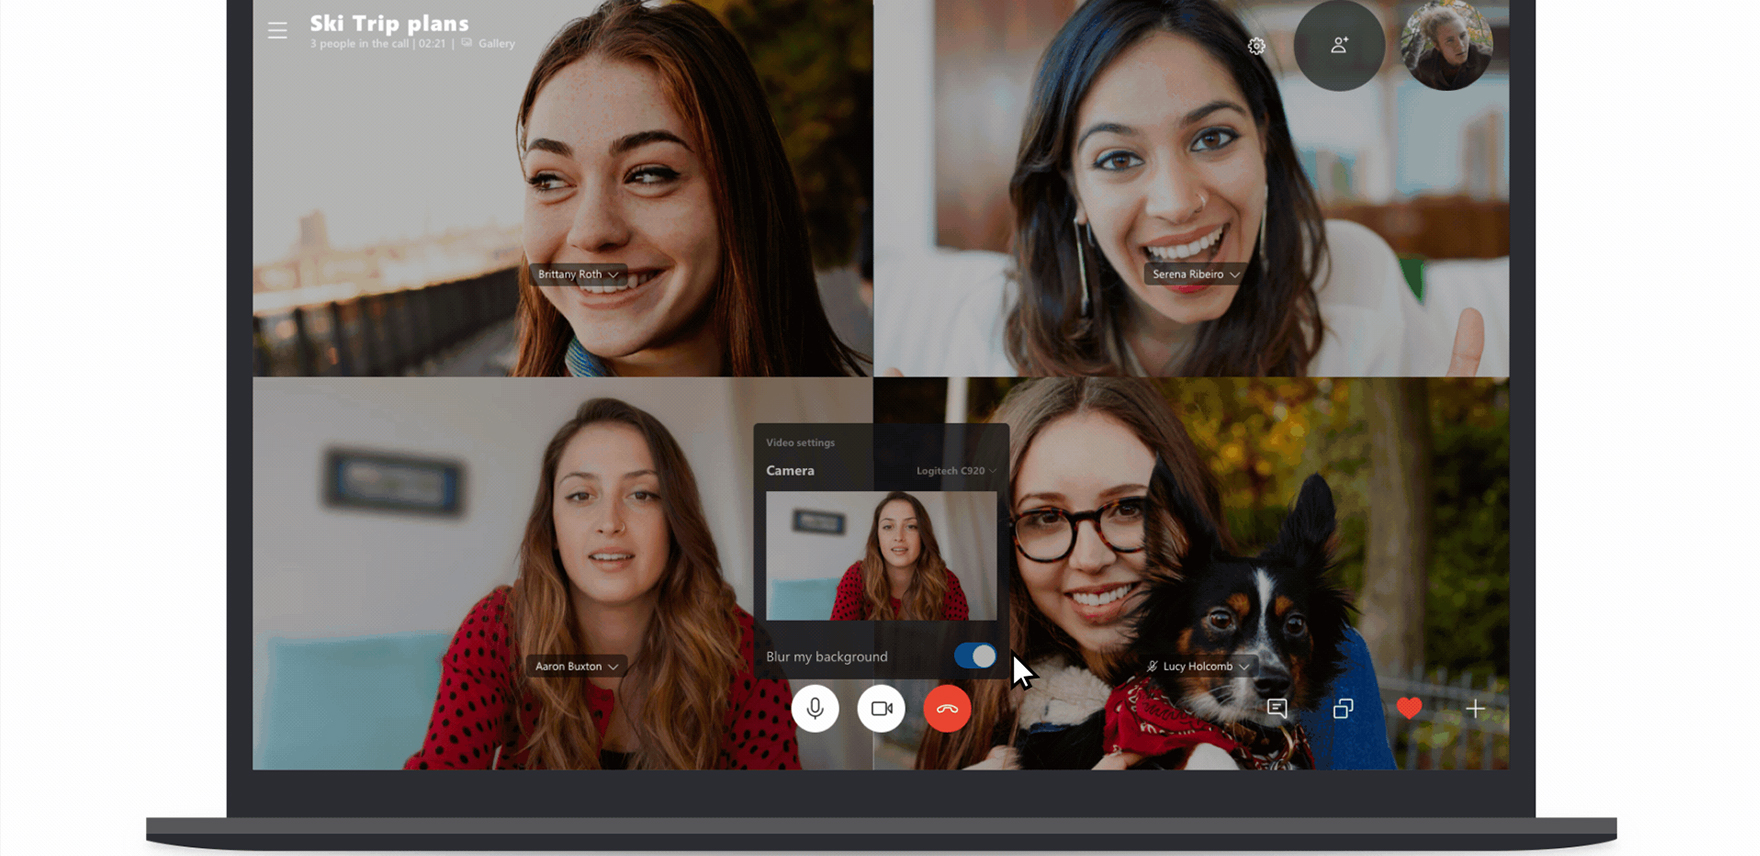 Screenshot of 4 women on a Skype call showing how one woman's background is blurred